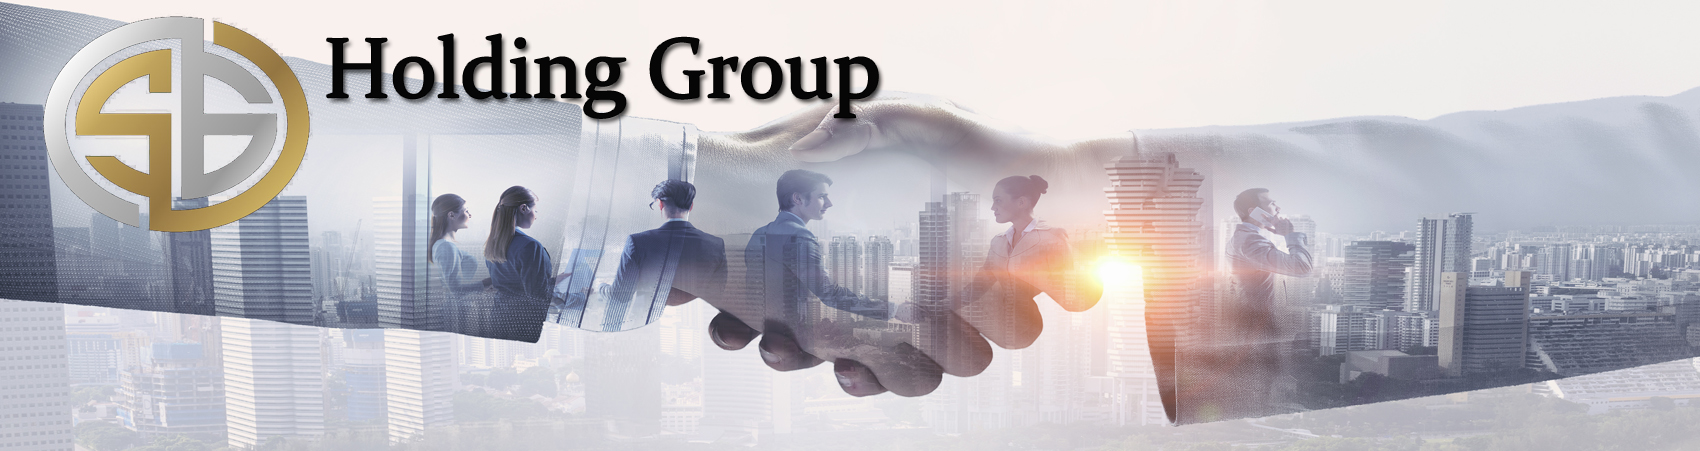 S & G Holding Group